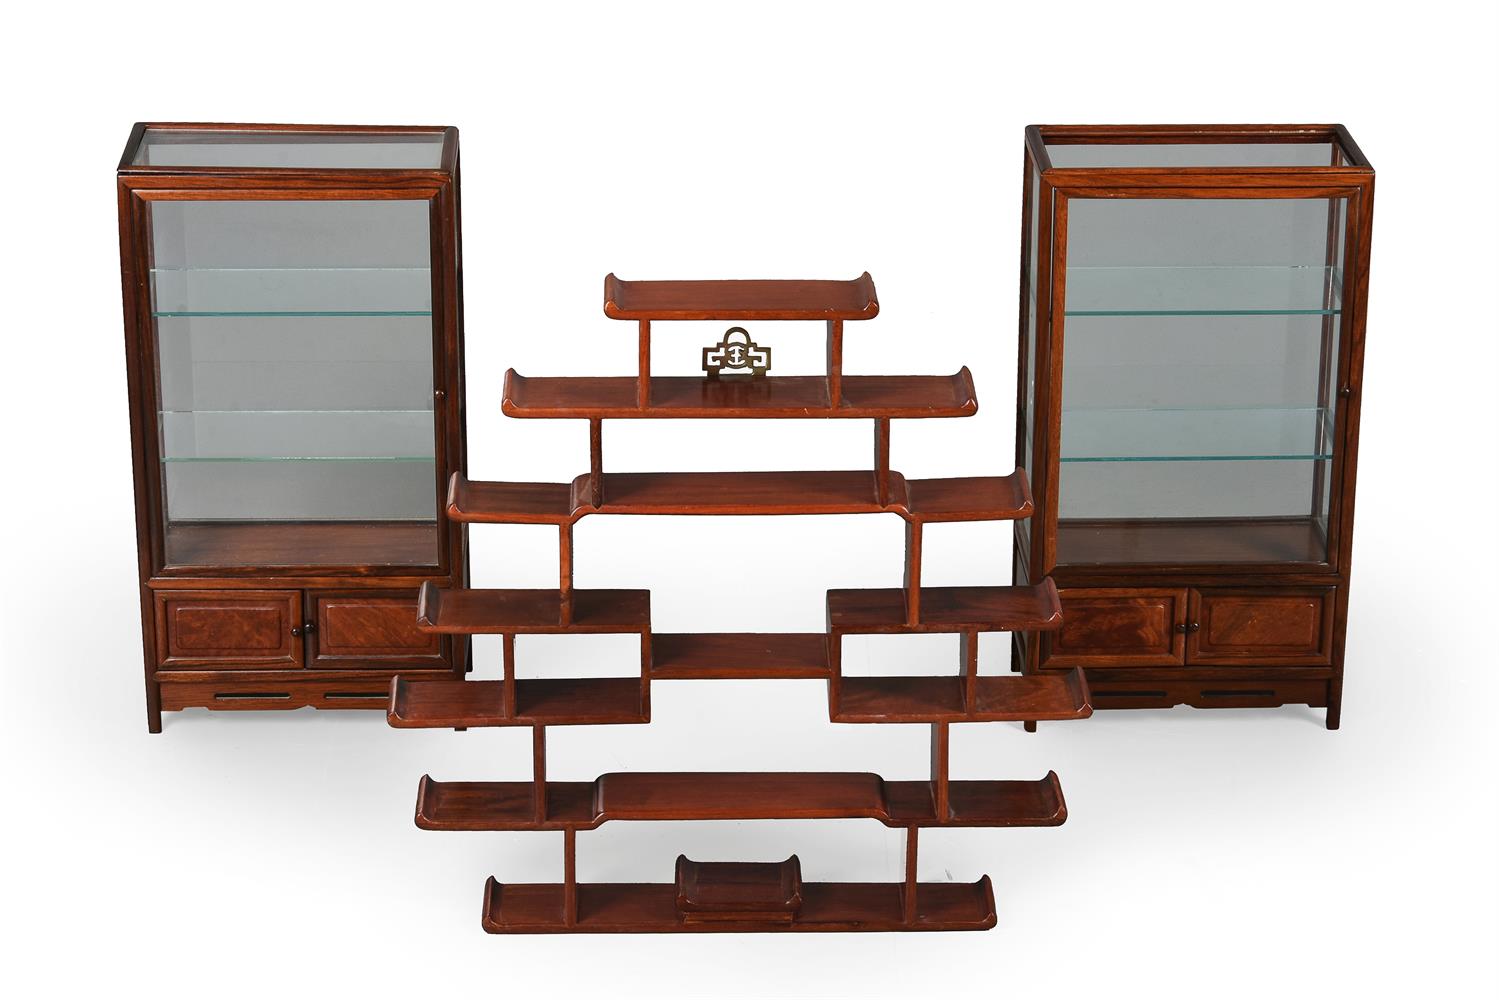 A pair of Chinese hardwood and burr wood table top display cabinets